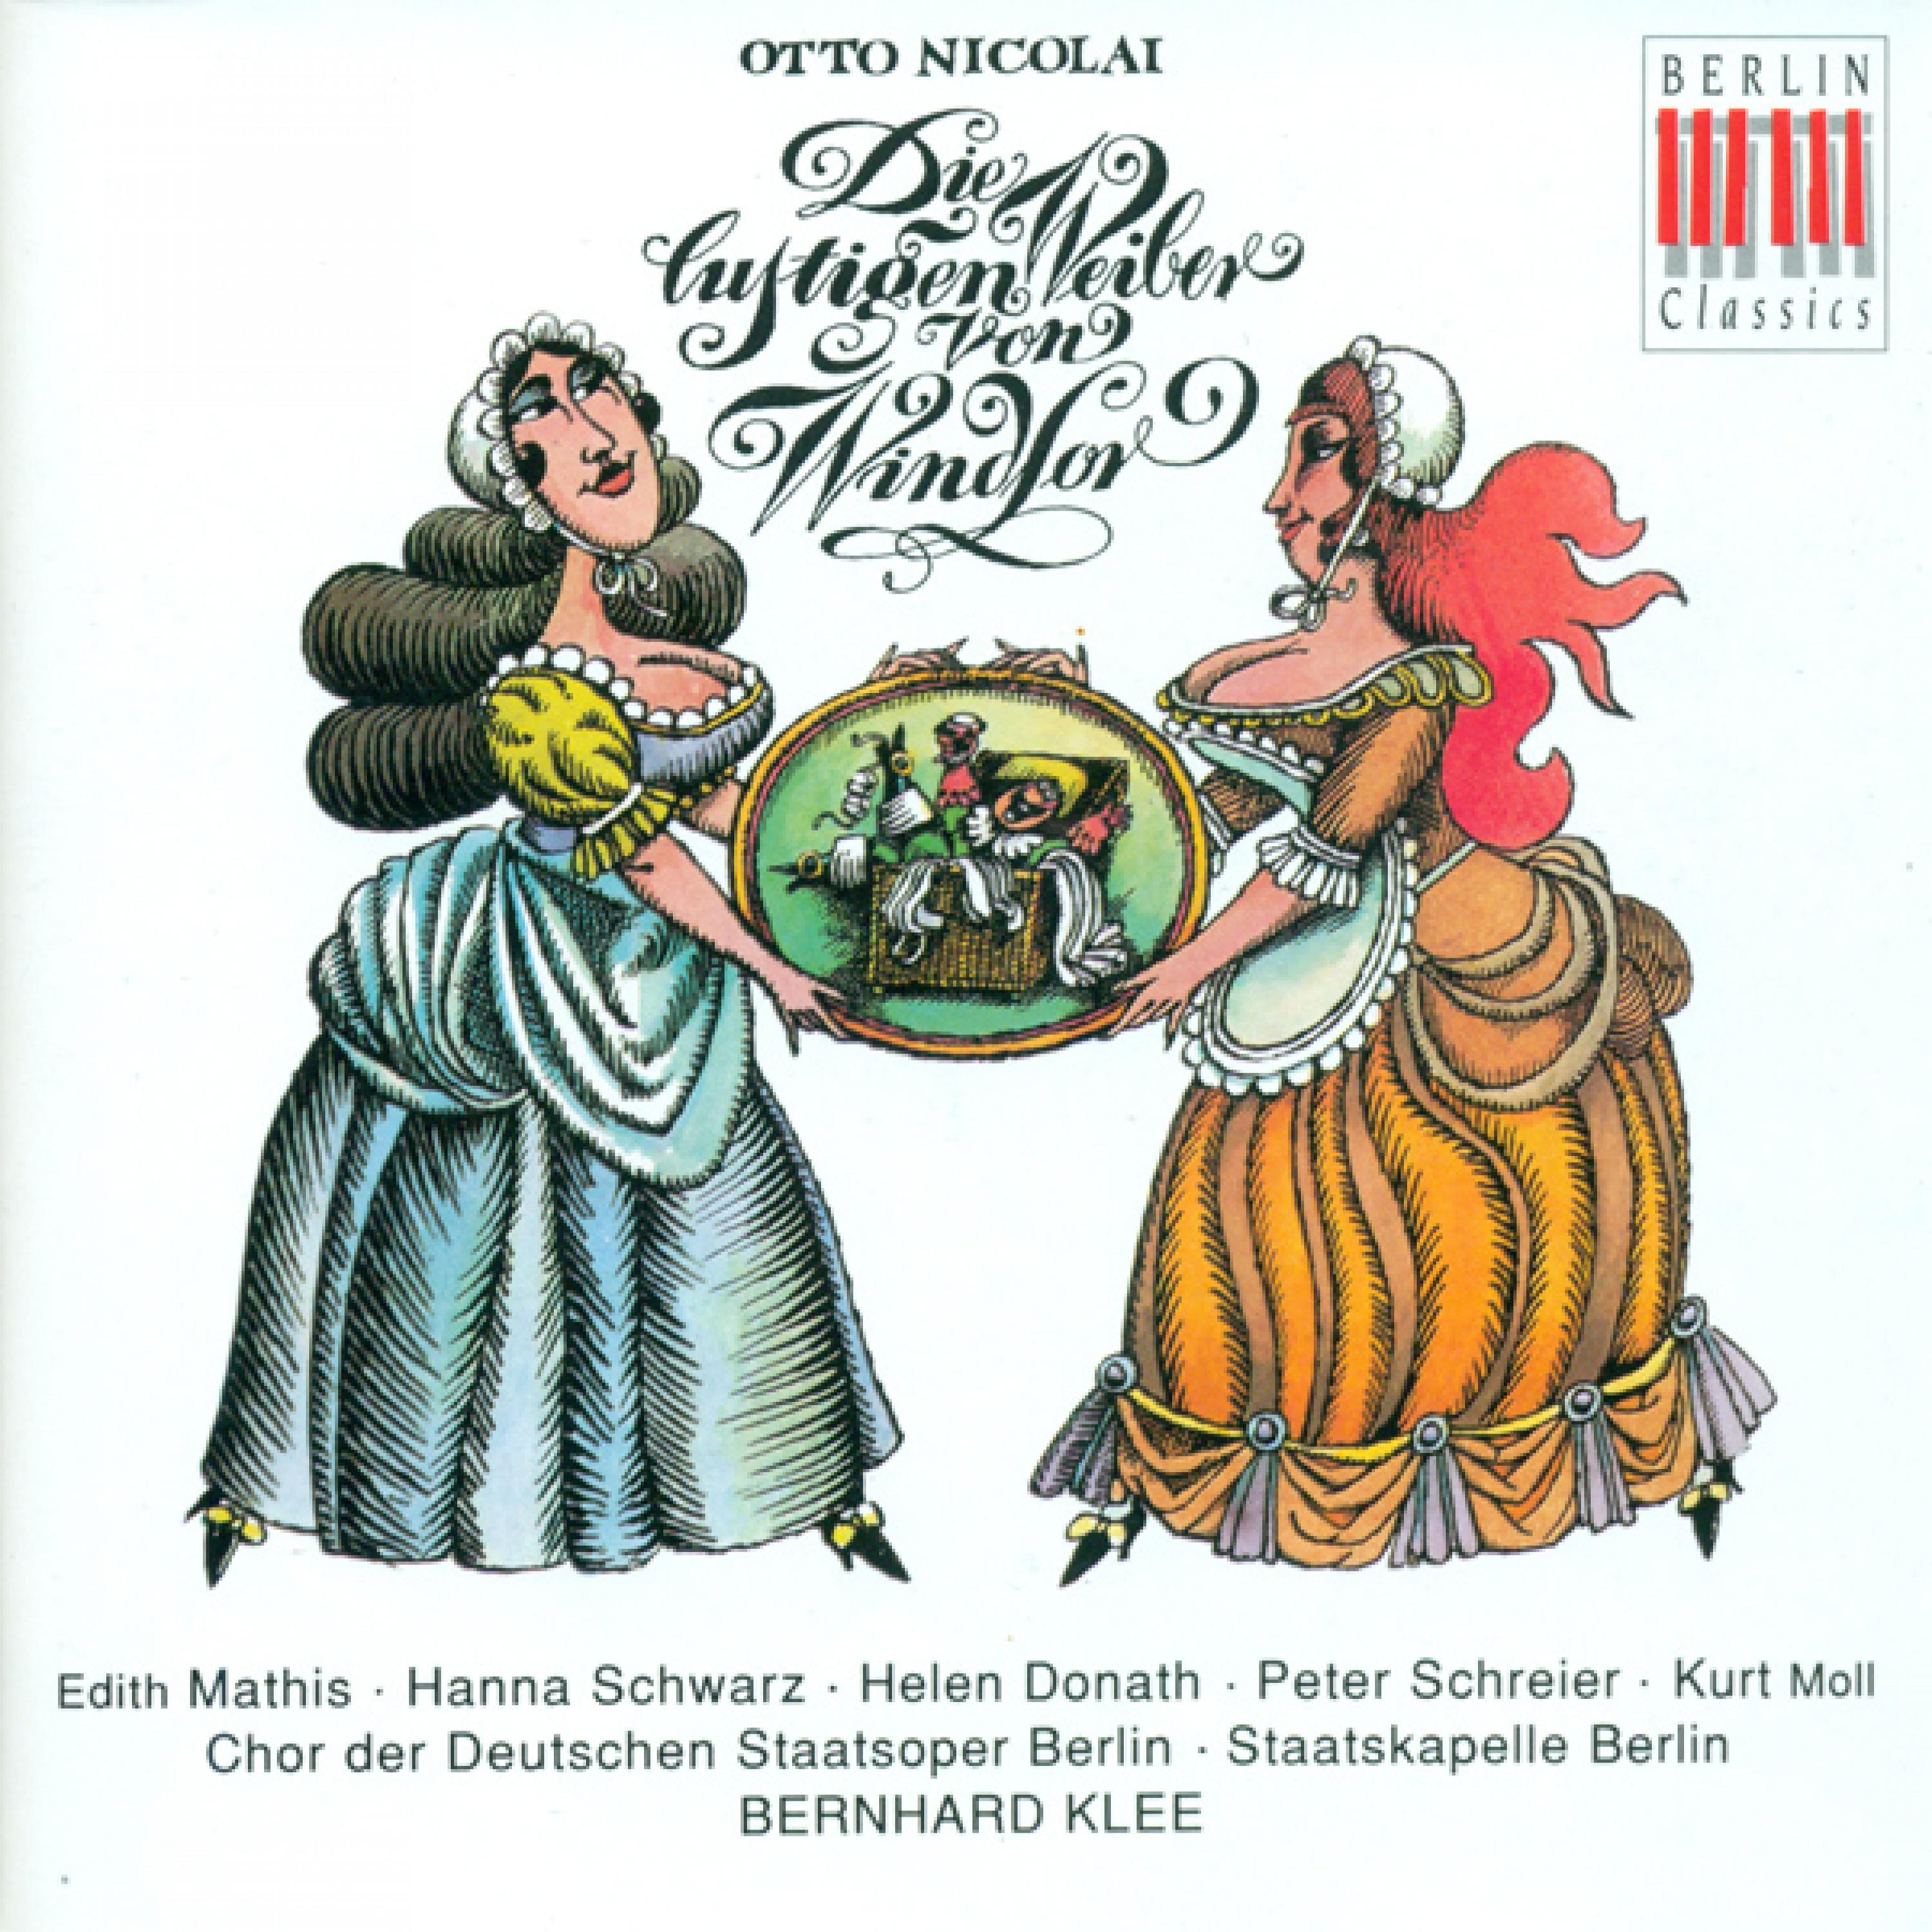 The Merry Wives of Windsor: Act II - "Horch, die Lerche singt im Hain"